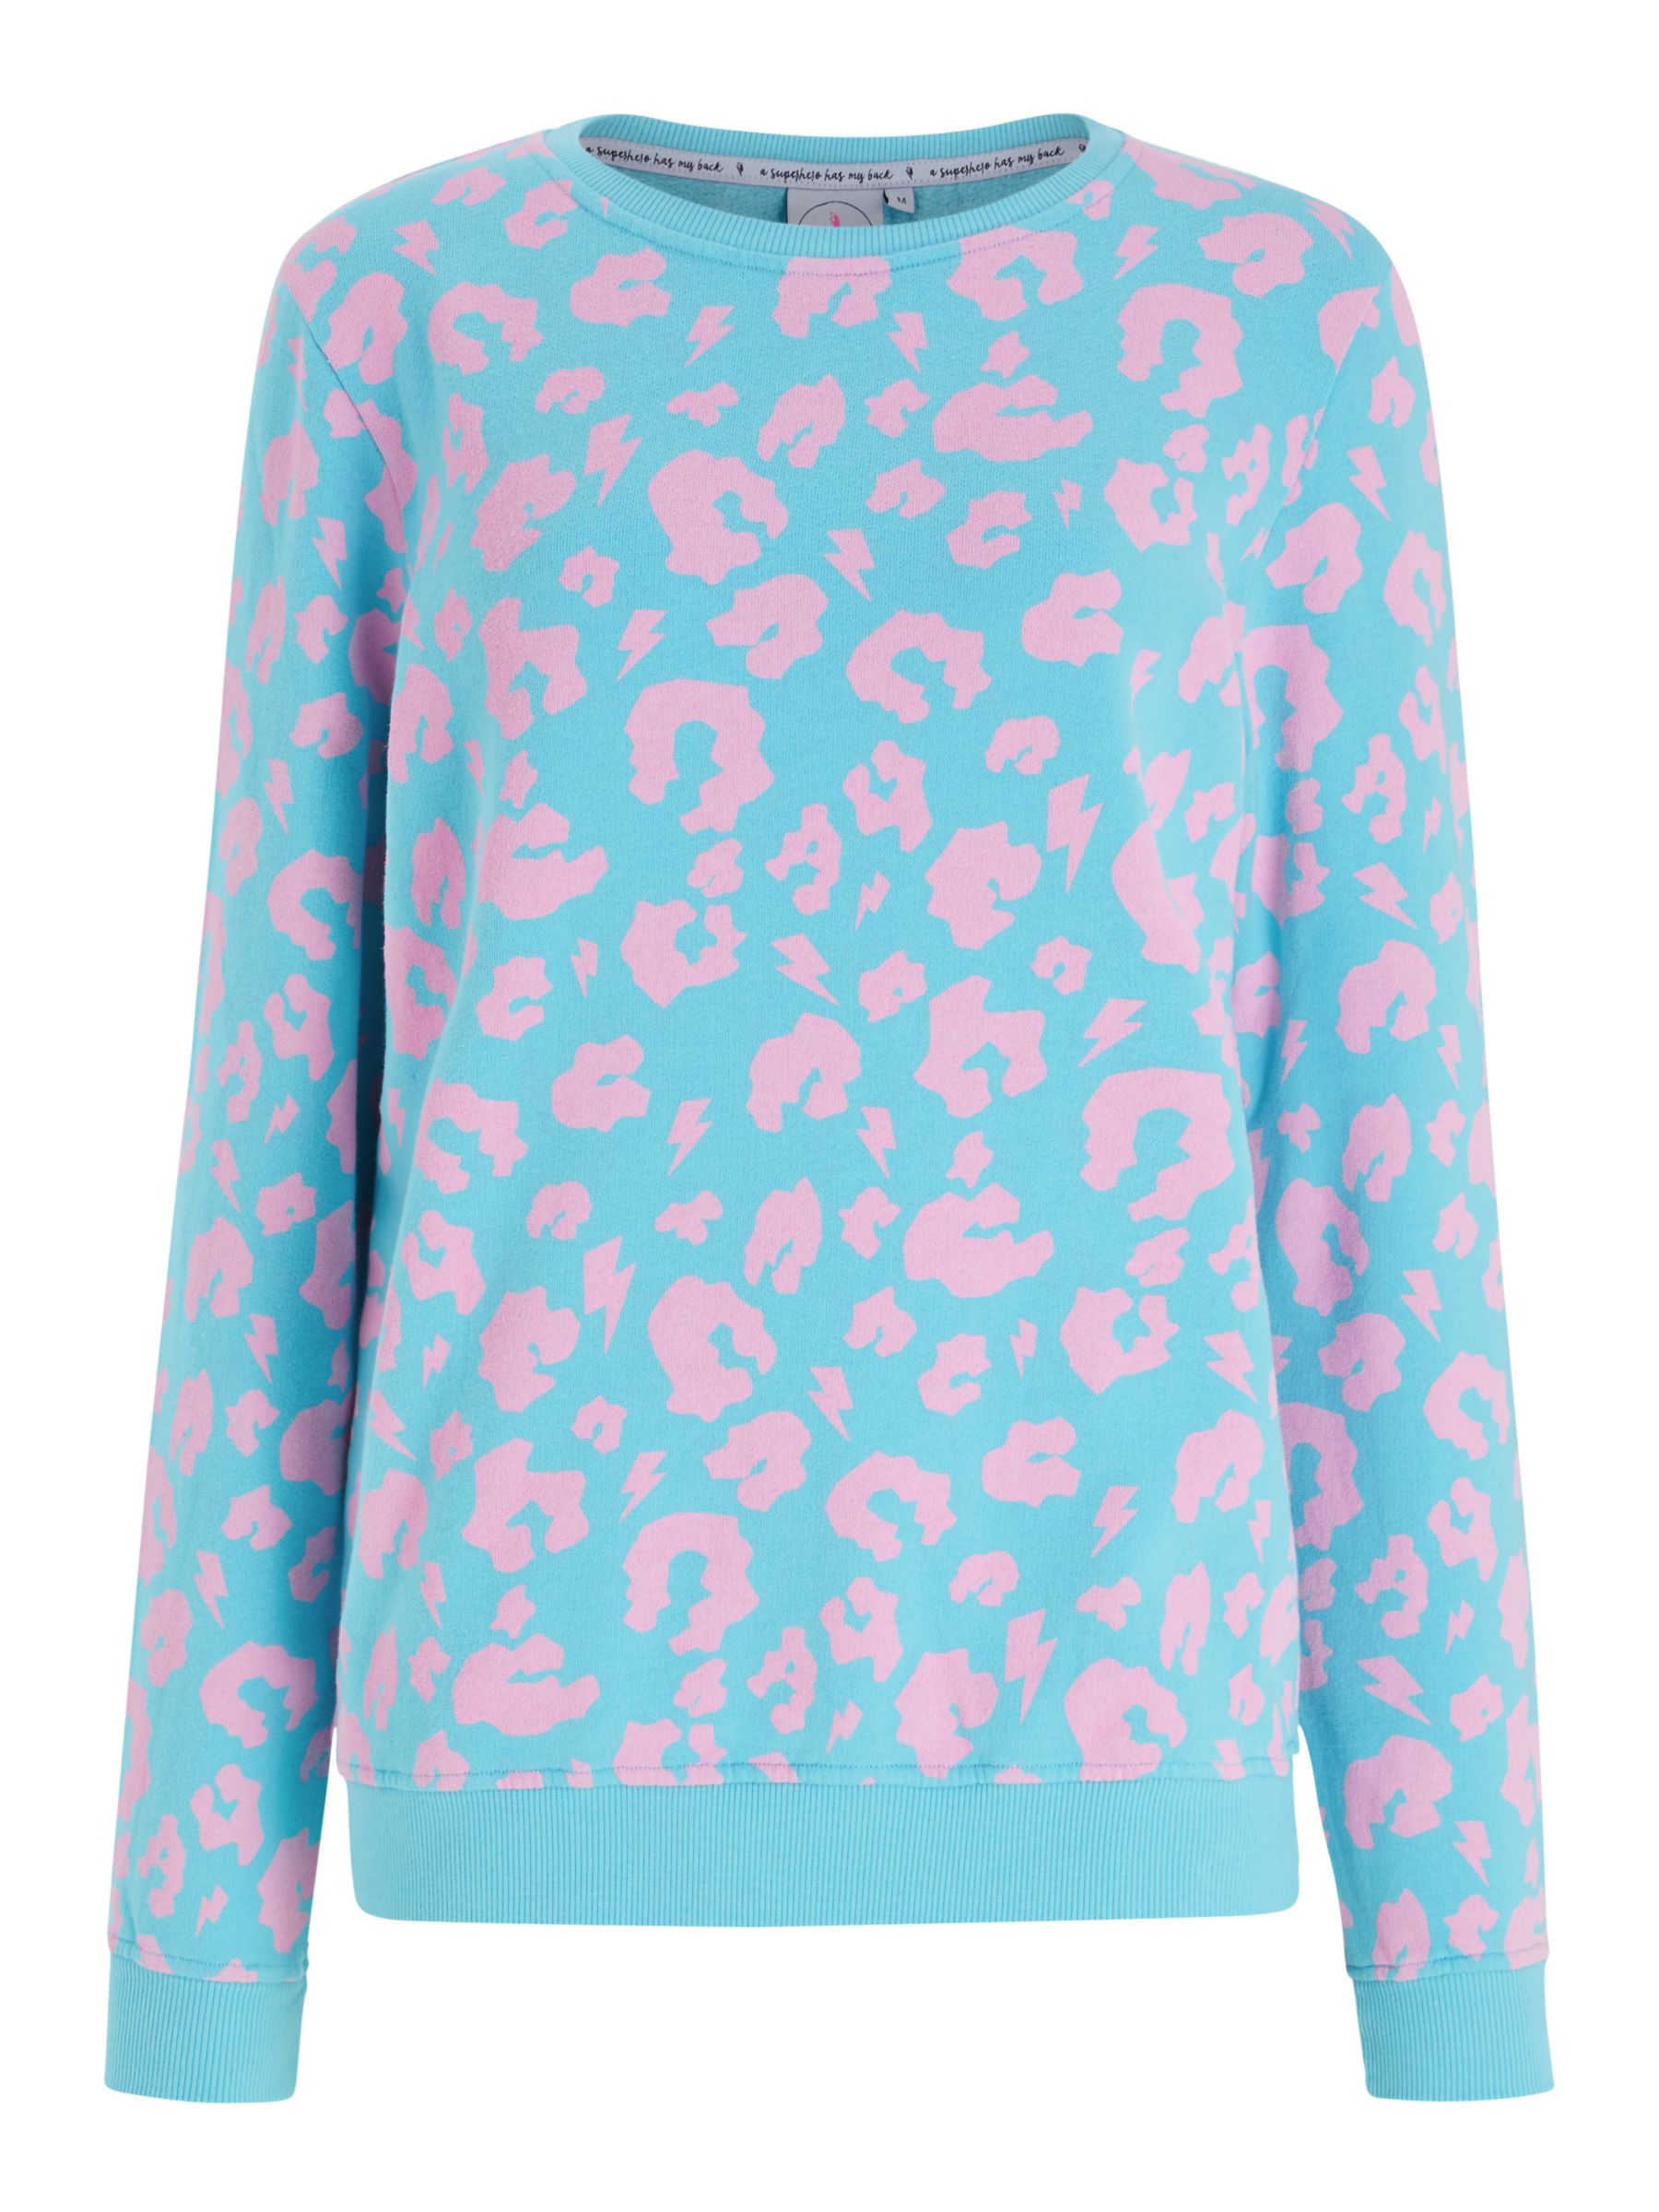 Scamp & Dude Mama Leopard Cotton Jumper, Turquoise/Pink